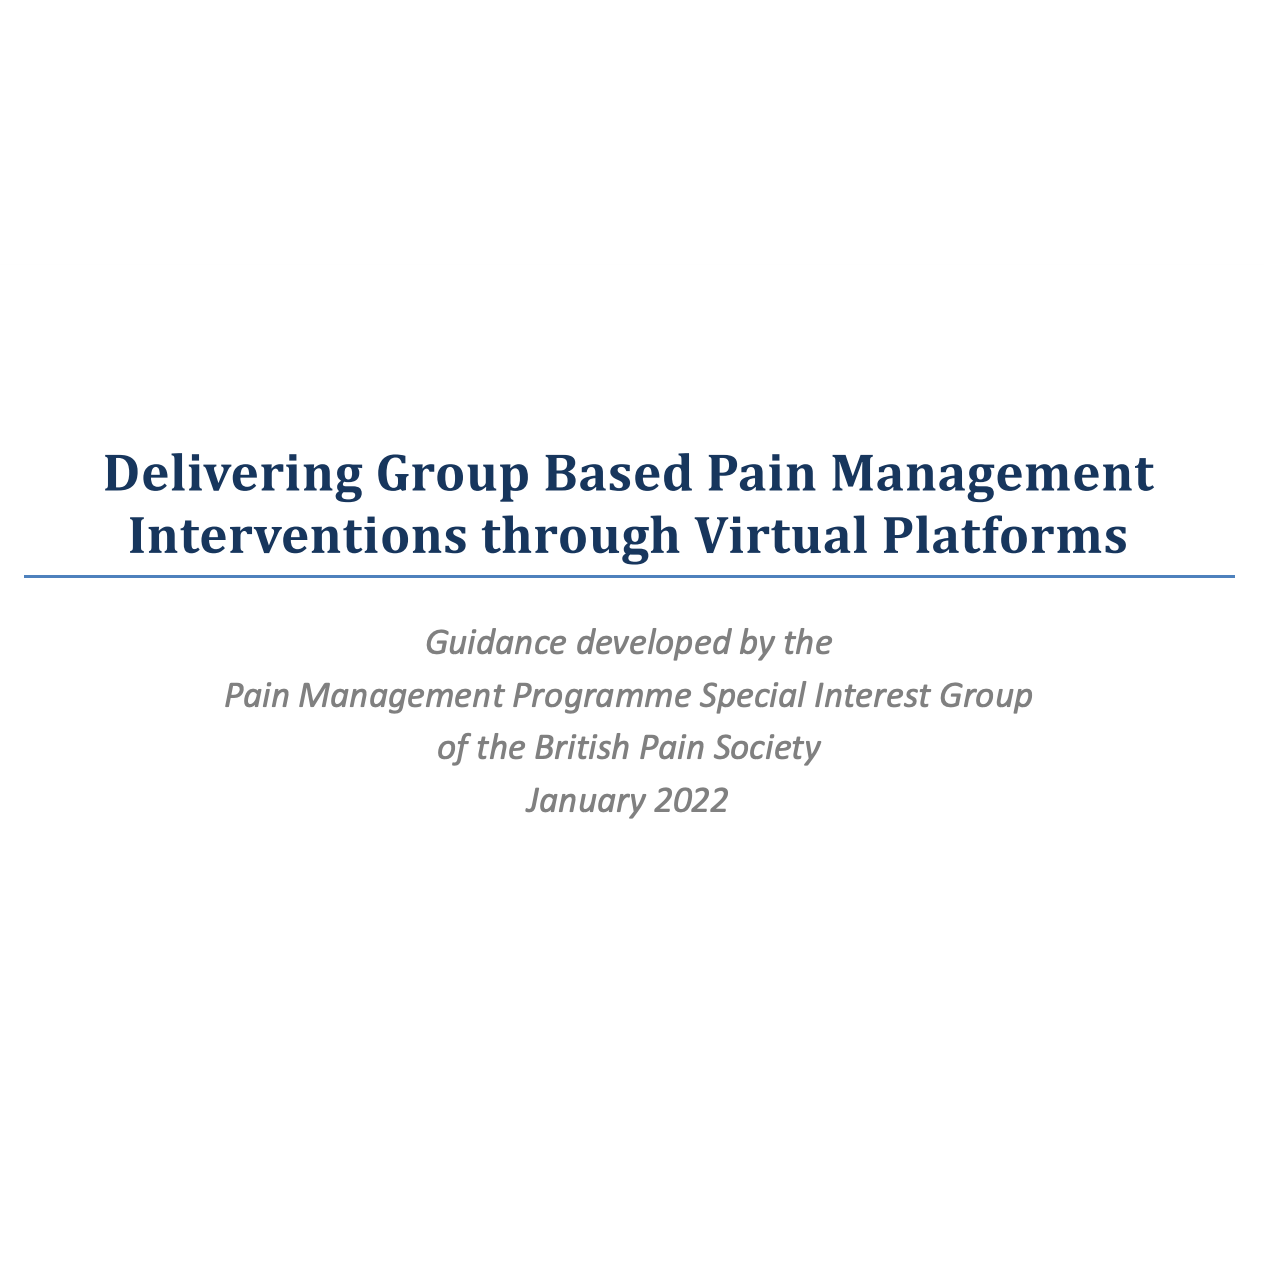 Delivering Group Based Pain Management Interventions through Virtual Platforms